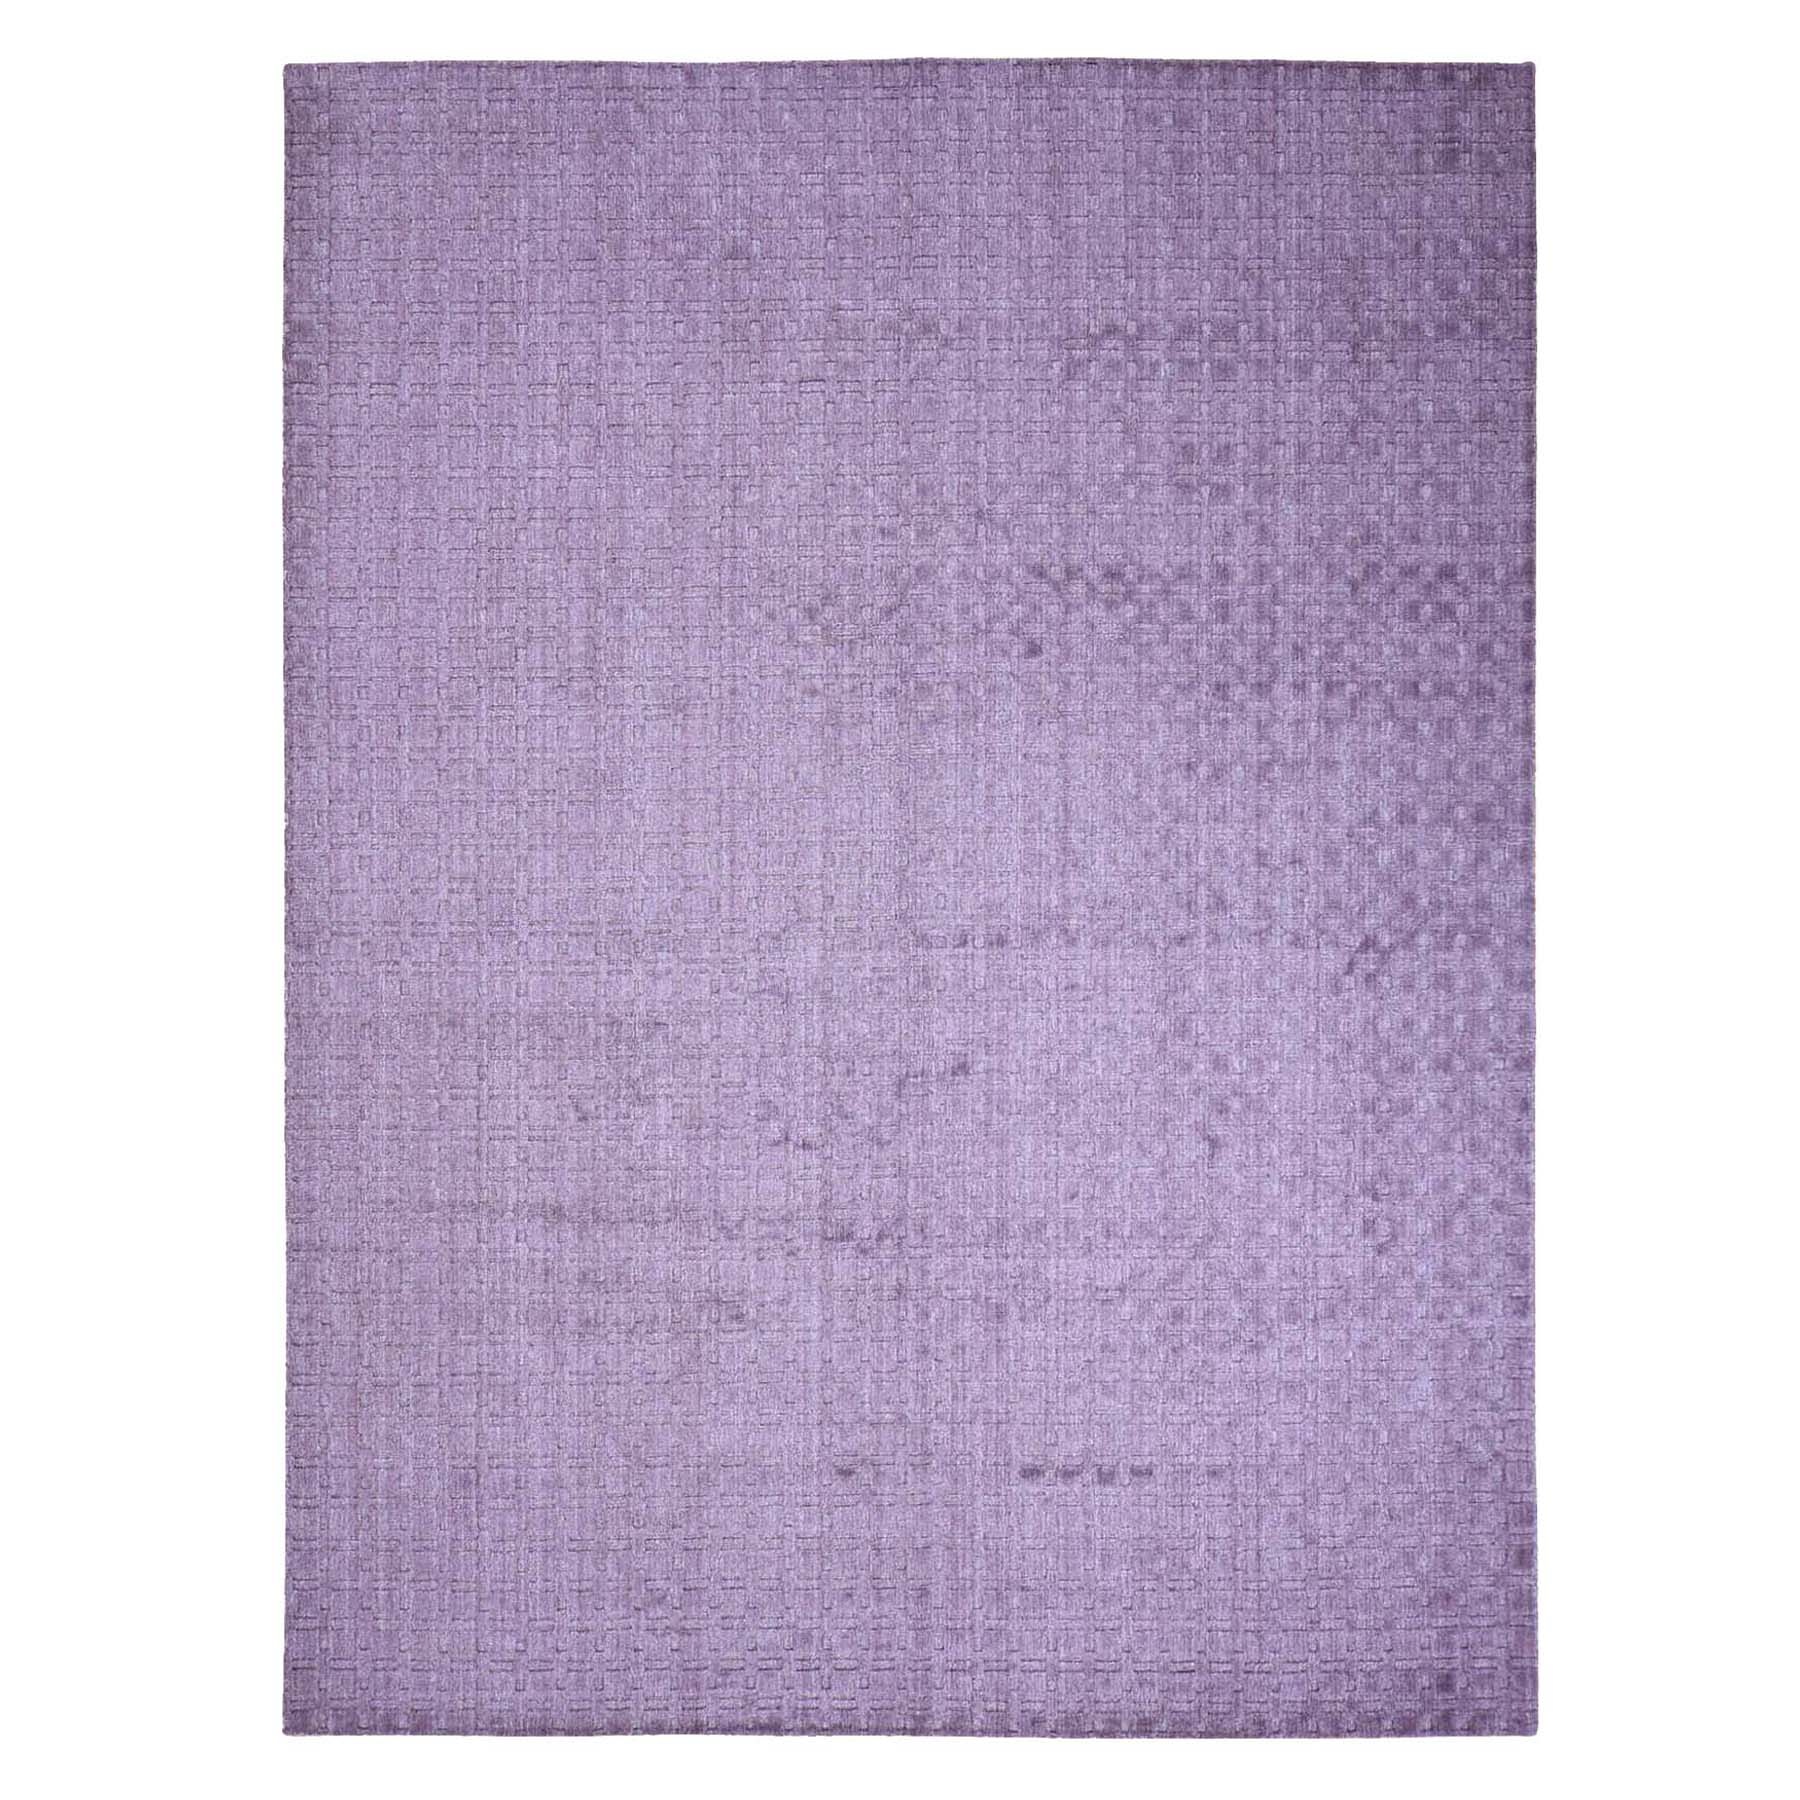 9'1'x12' Pure Wool Hand-Loomed Tone on Tone Ultra Violet Oriental Rug 